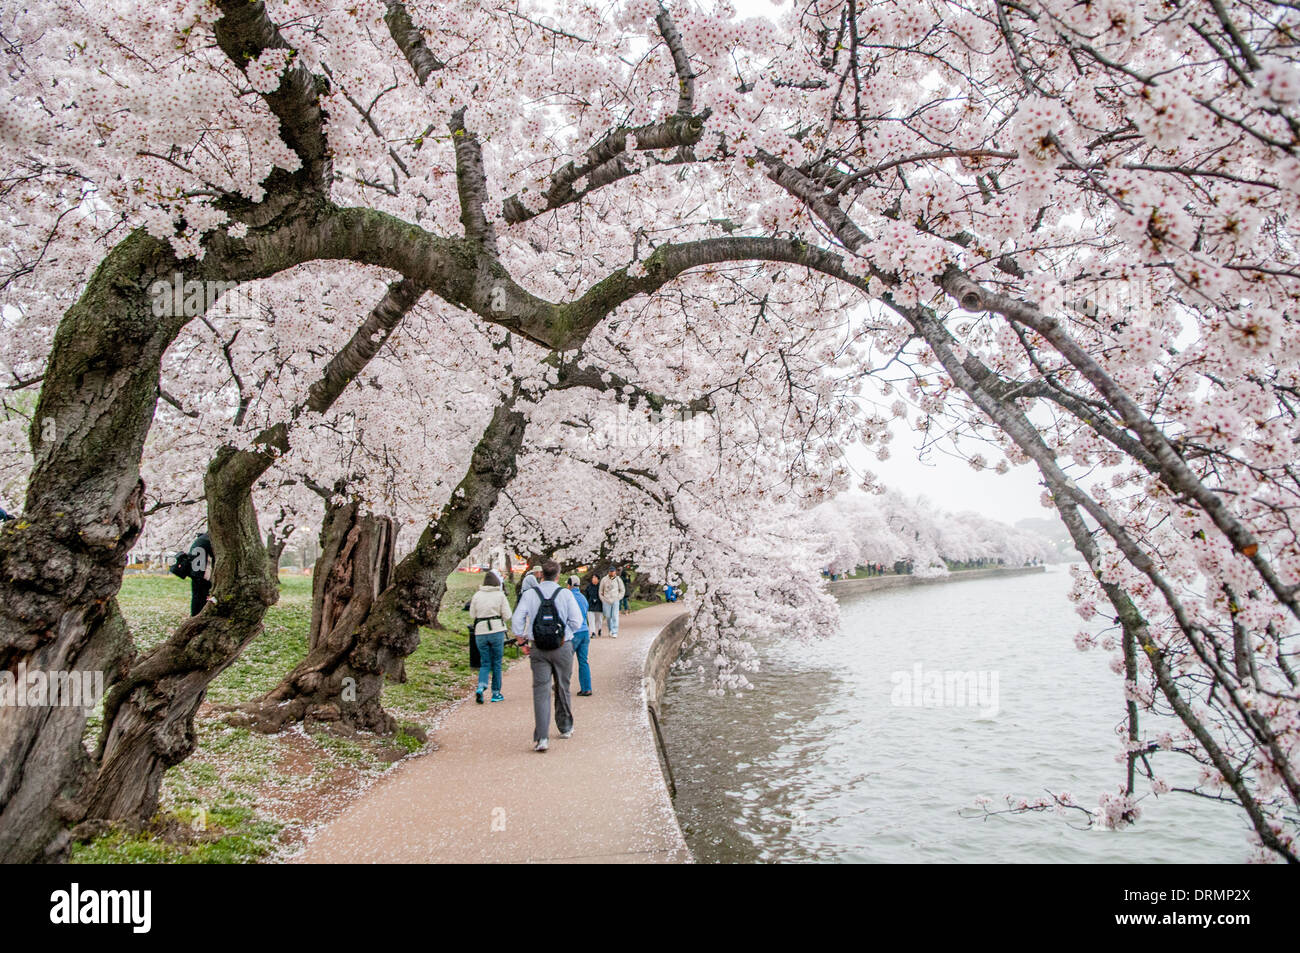 WASHINGTON DC, USA - Some of the oldest cherry blossoms trees overhang ...